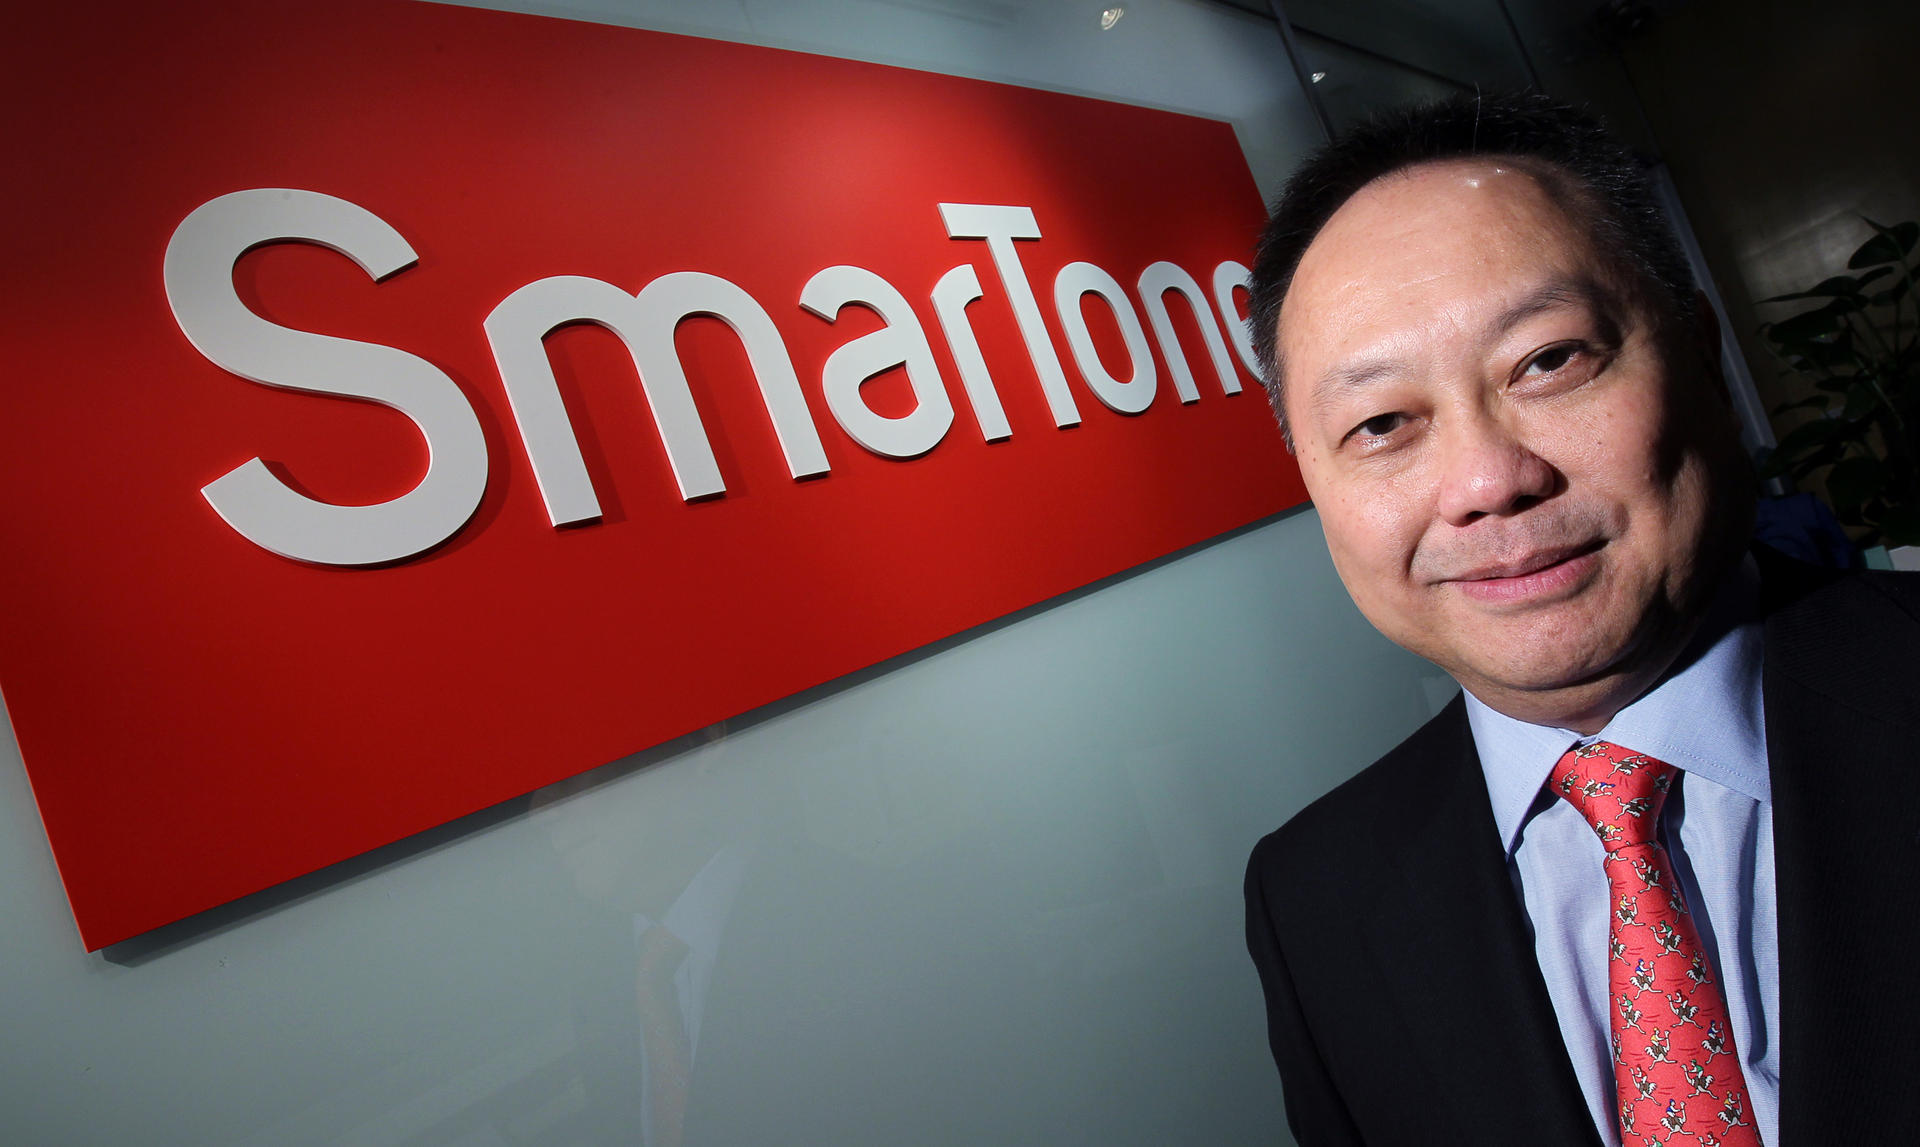 Douglas Li, the chief executive of SmarTone Telecommunications, says there is no reason to disclose its contract with Apple. Photo: Dickson Lee